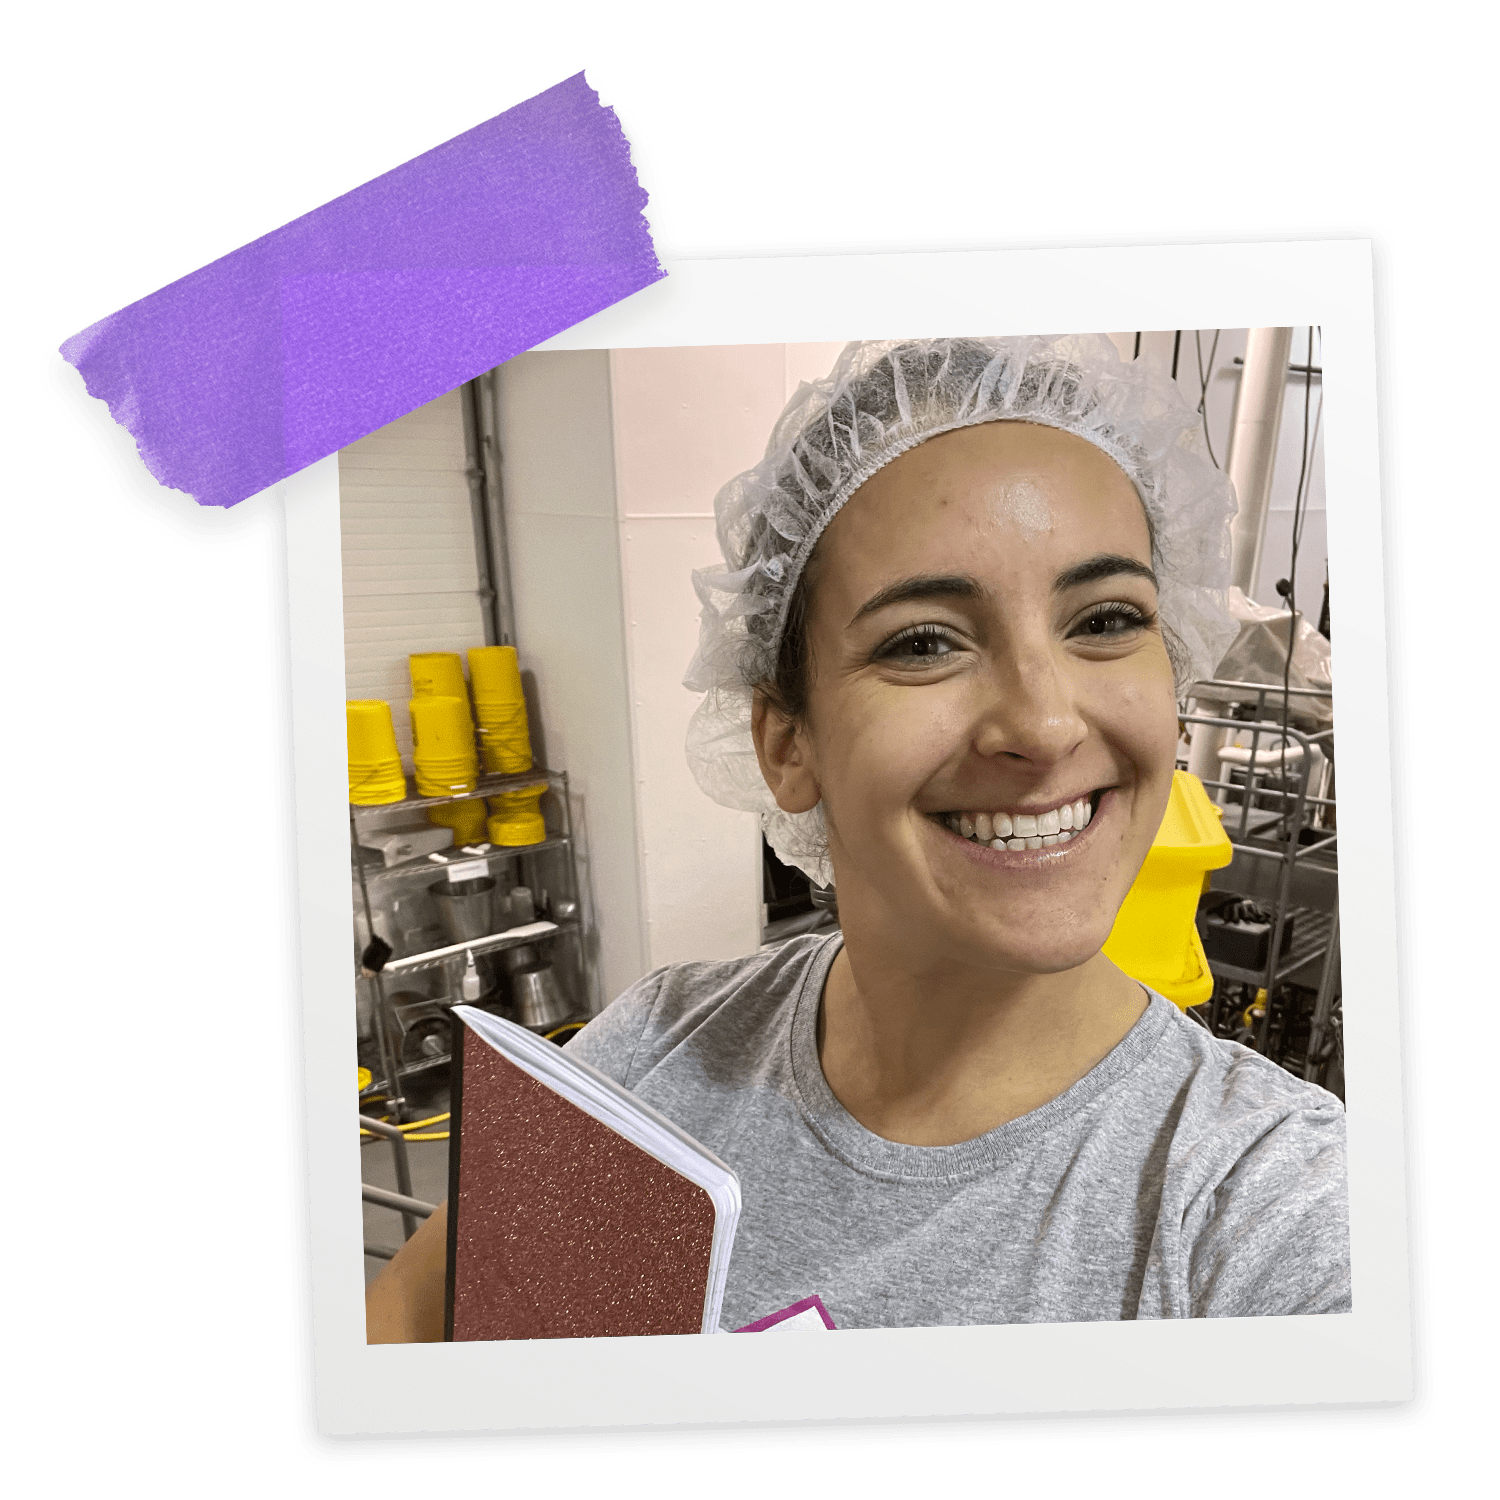 A woman stands in a manufacturing plant holding a notebook in one hand, smiling and wearing a hair net!